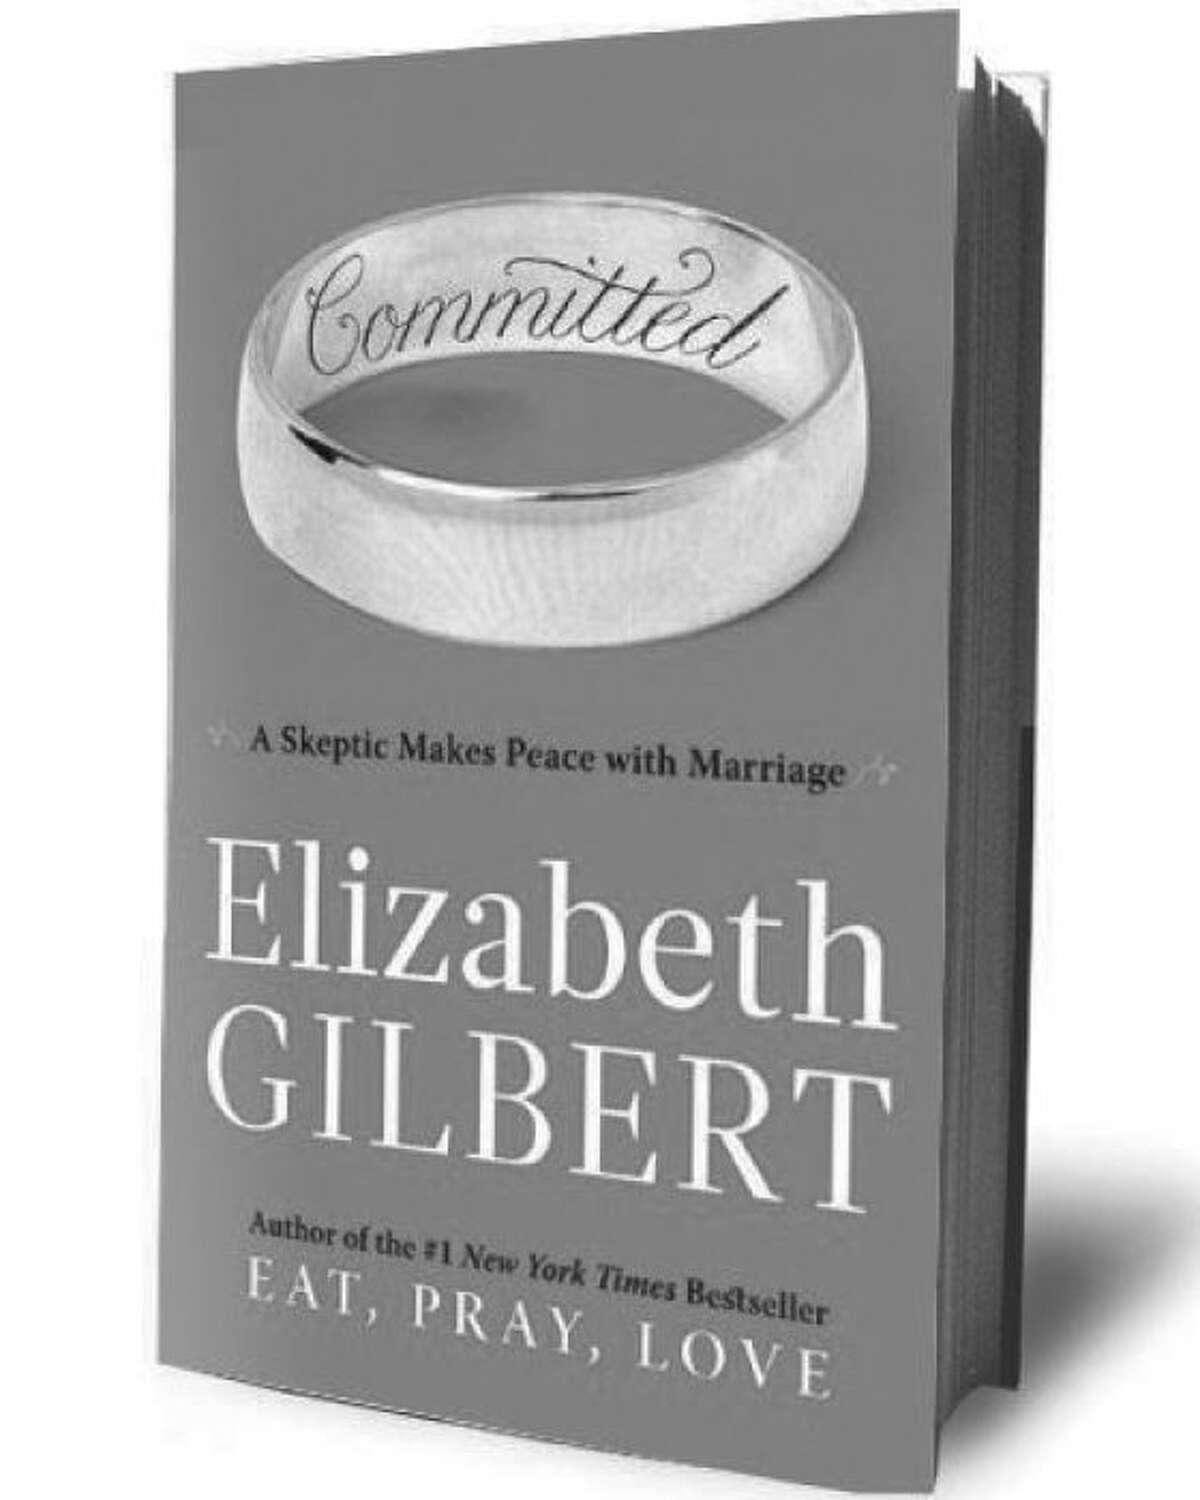 'Committed,' by Elizabeth Gilbert